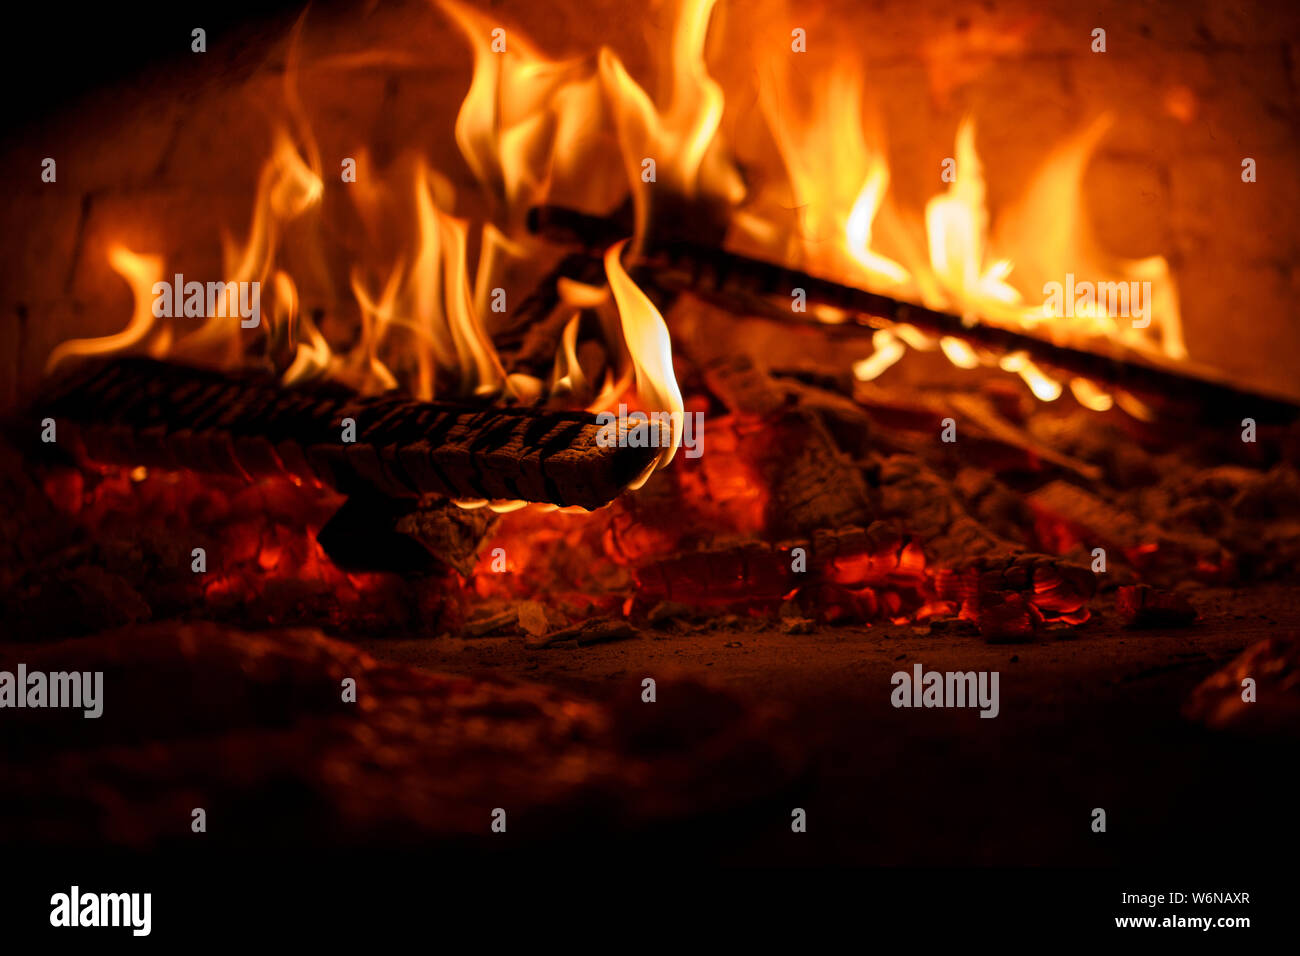 Oven for pizza. Beautiful fire burns in the furnace Stock Photo